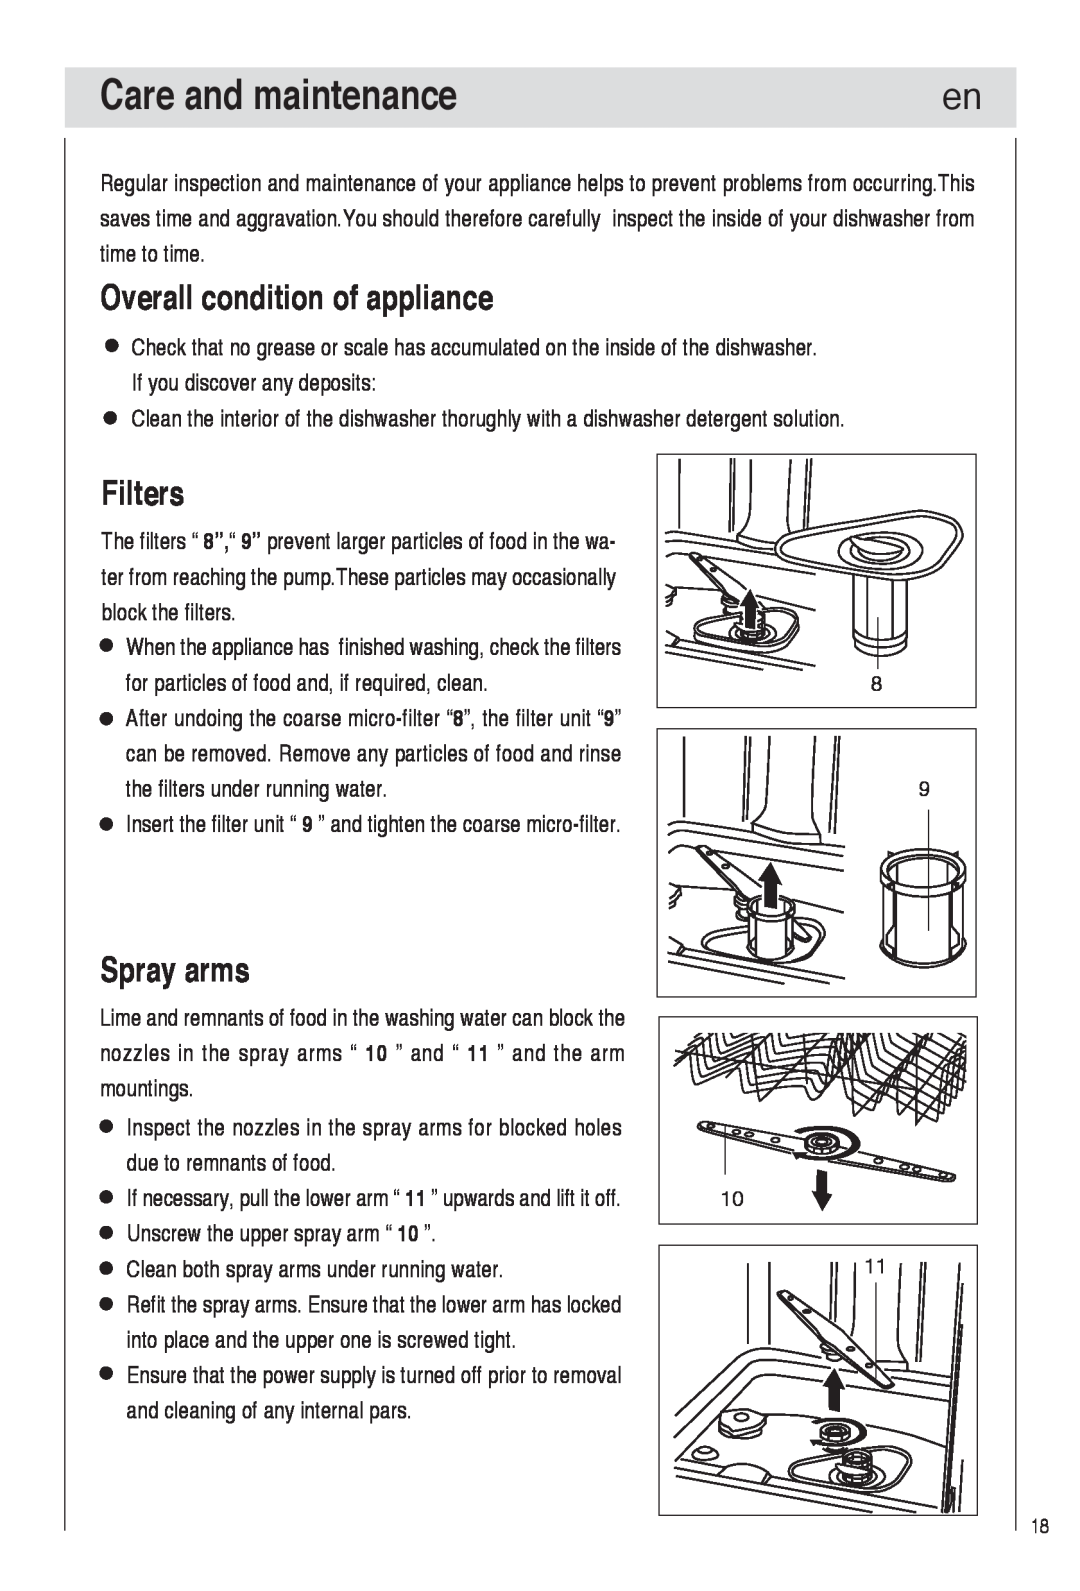 Haier DW9-TFE1 operation manual Care and maintenance, Overall condition of appliance, Filters, Spray arms 